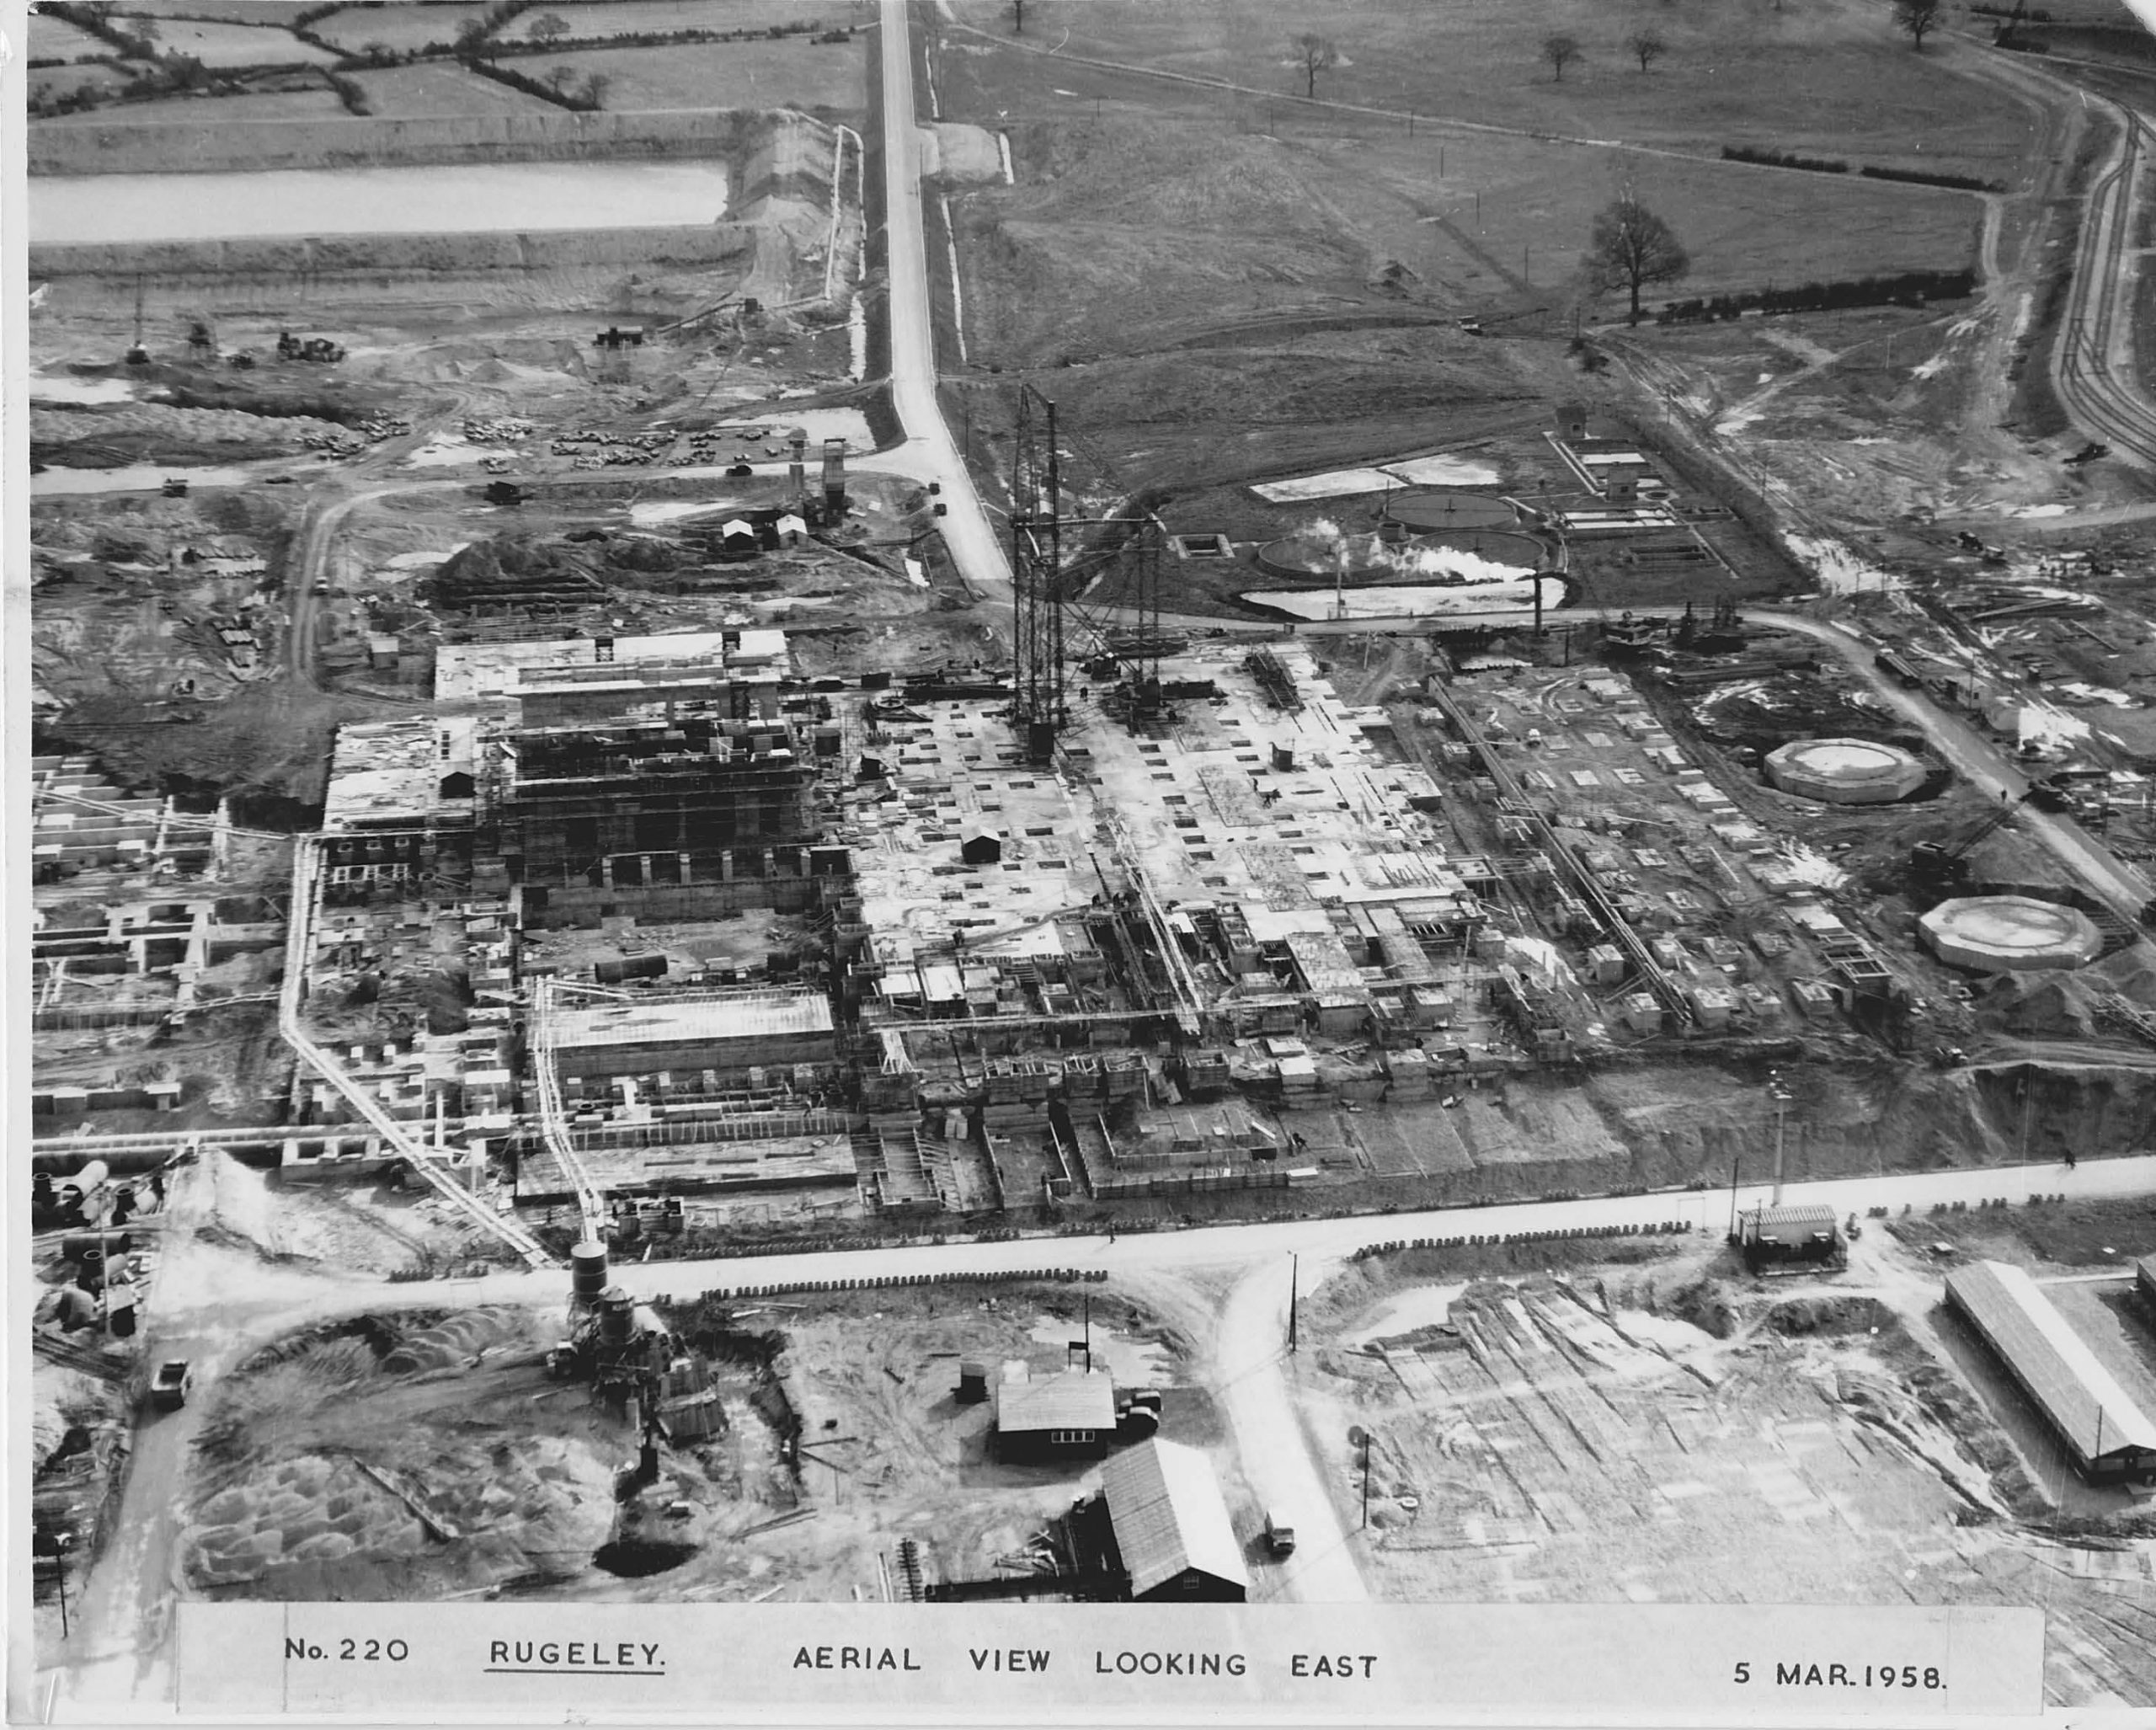 Construction of Rugeley A power station circa 1958. Image courtesy of Engie